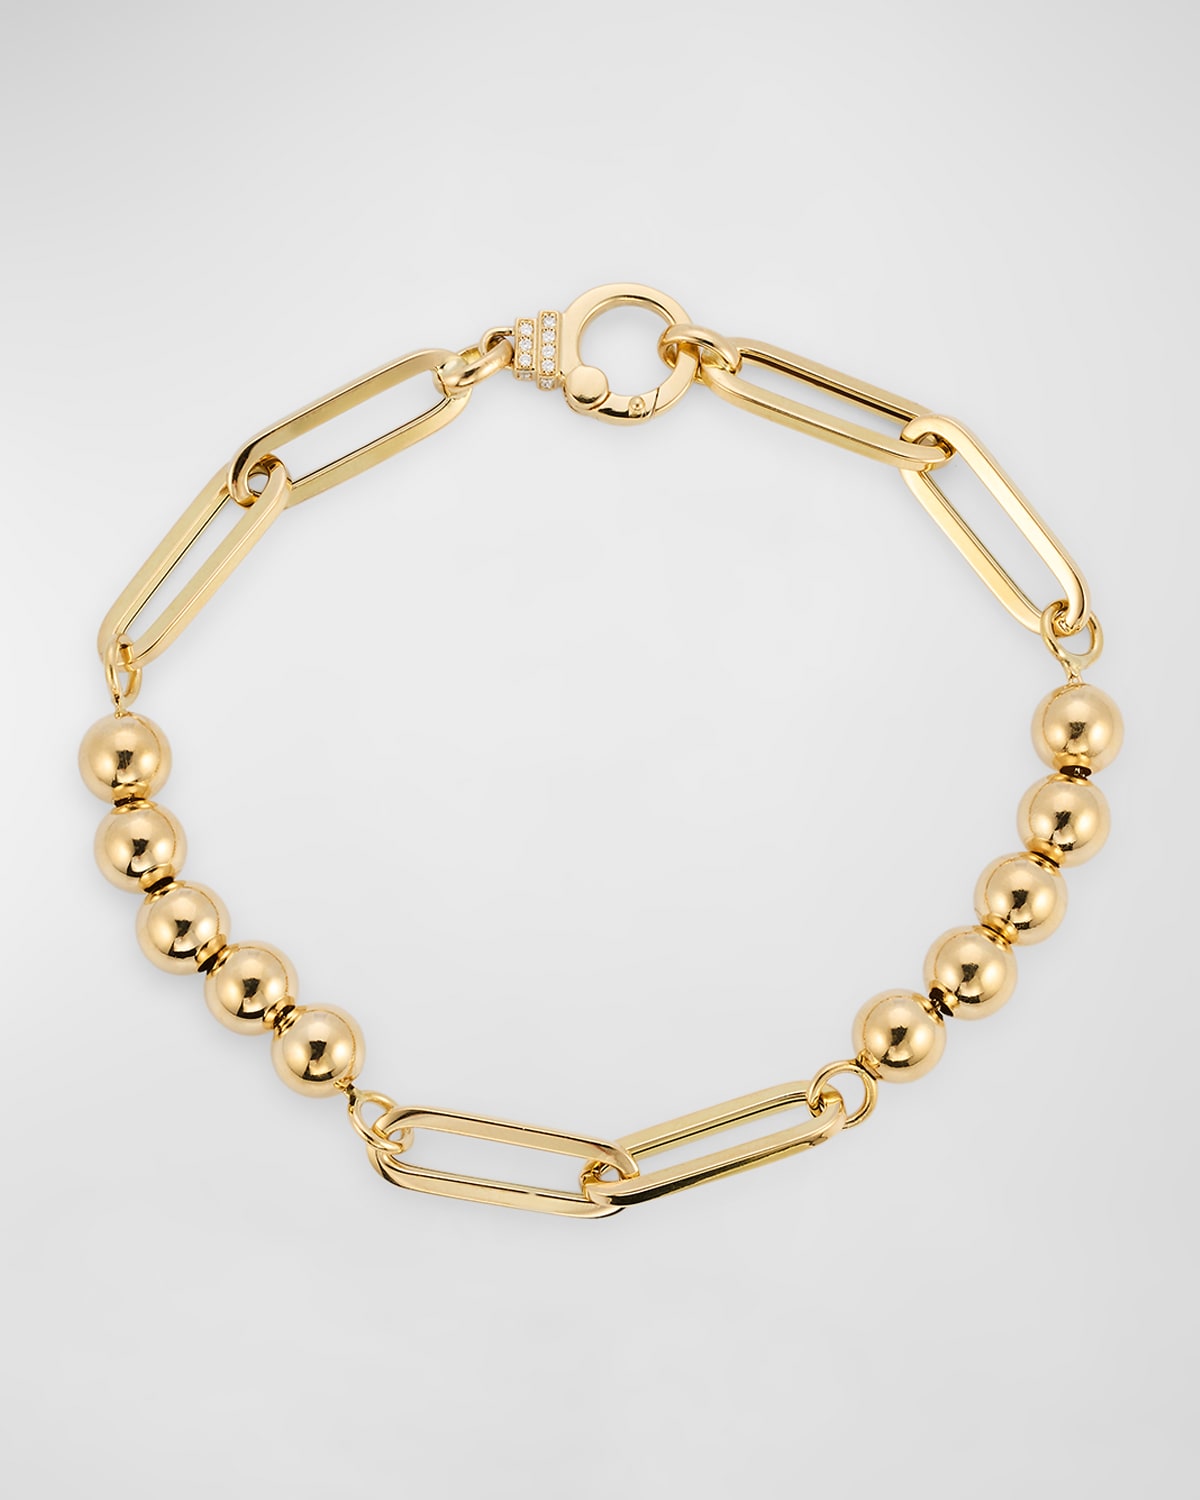 18K Yellow Gold Beads and Oval Link Bracelet with GH-SI Diamonds